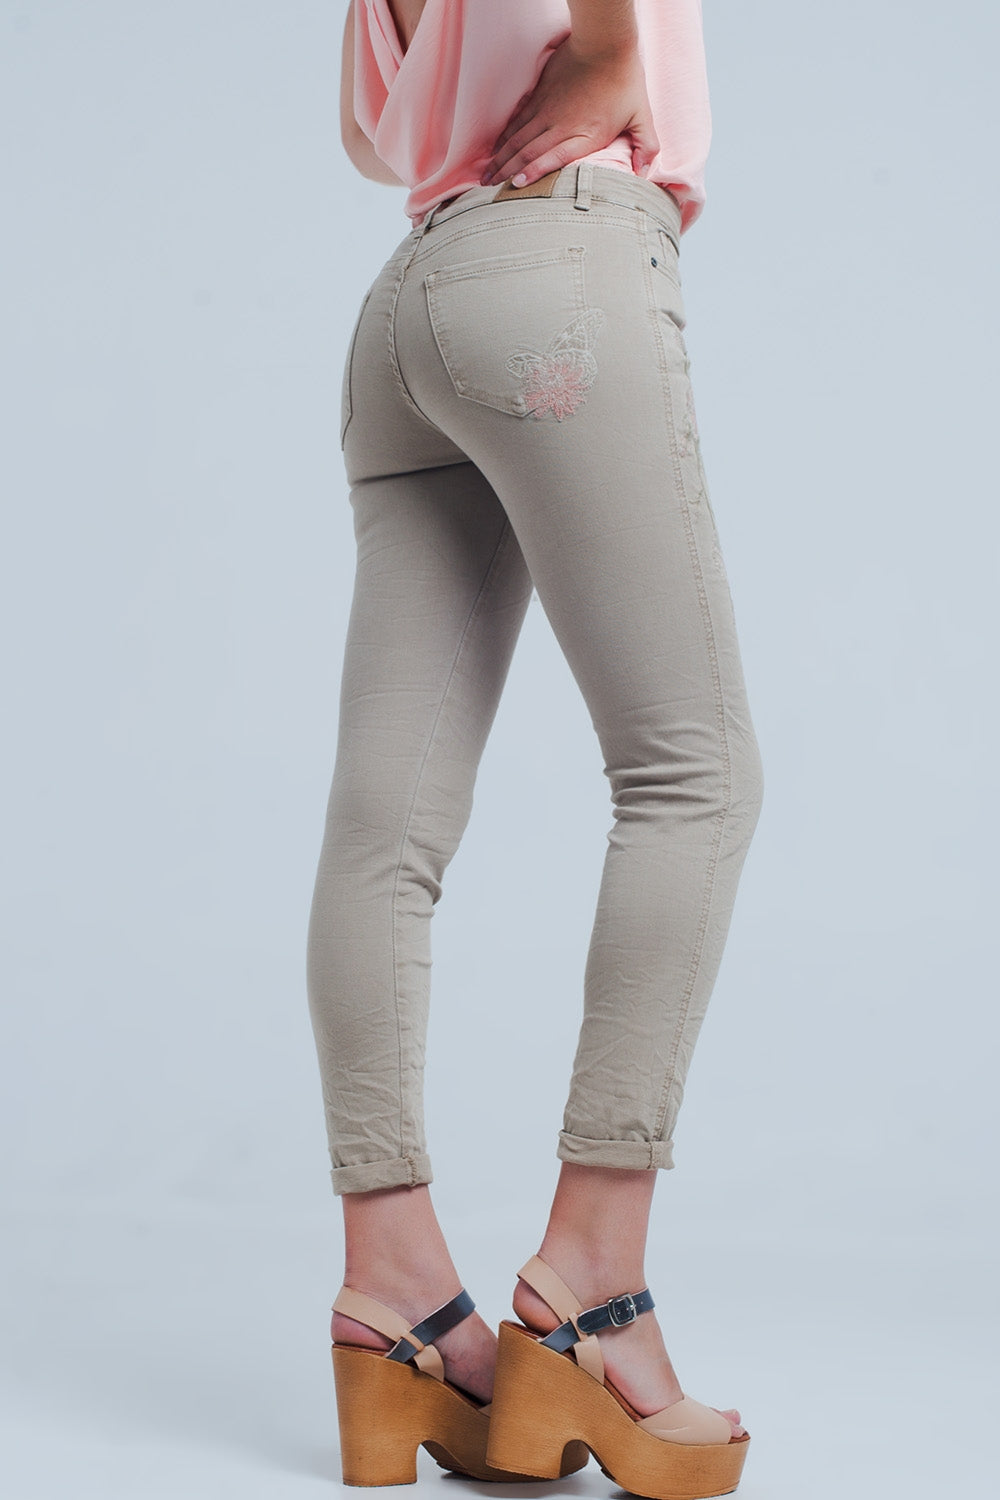 Beige Jeans With Floral Embroidery